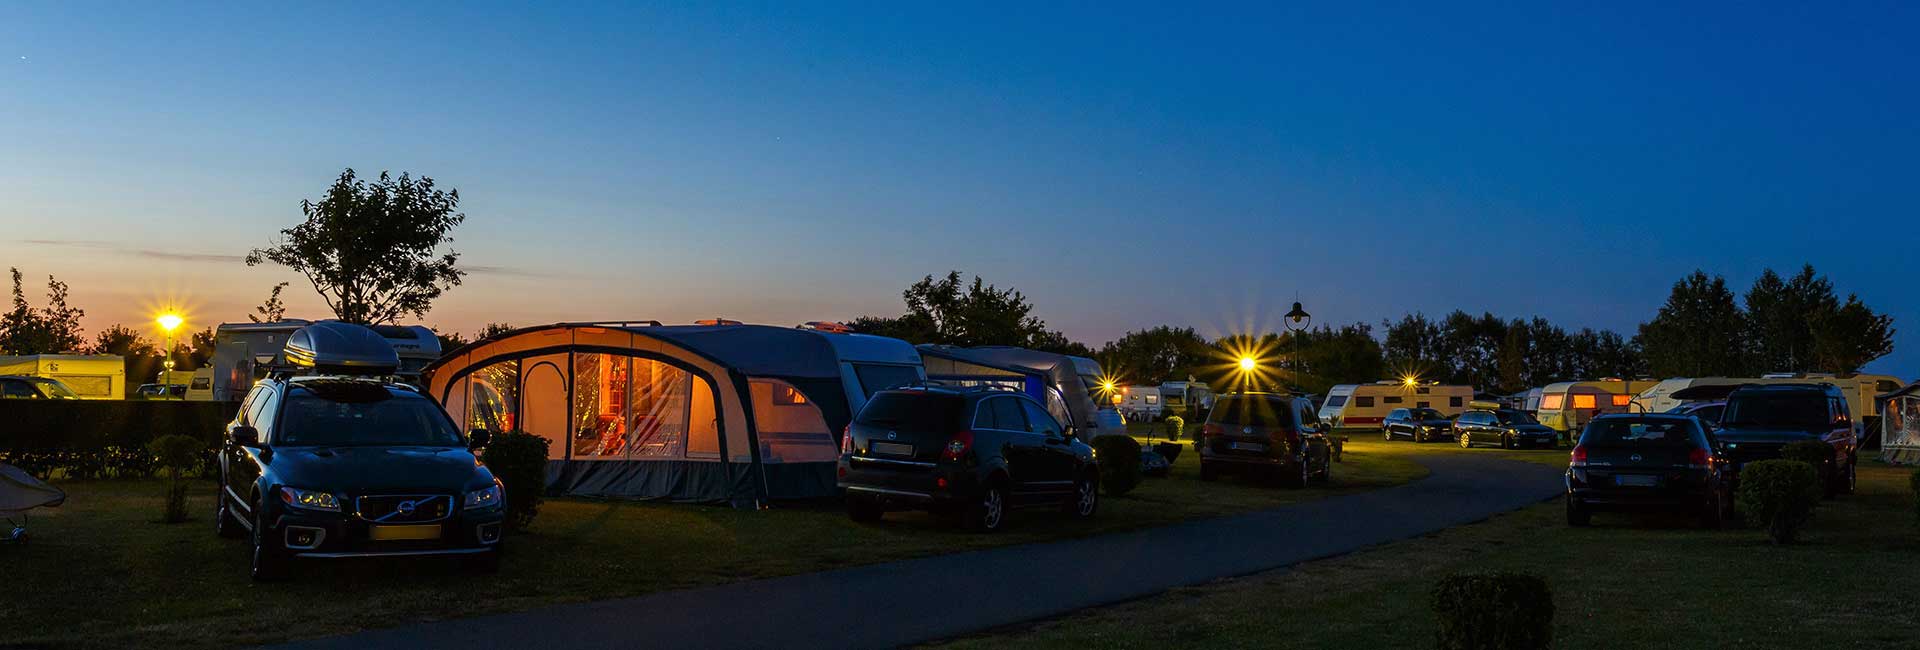 Camping Fehmarn Ostsee